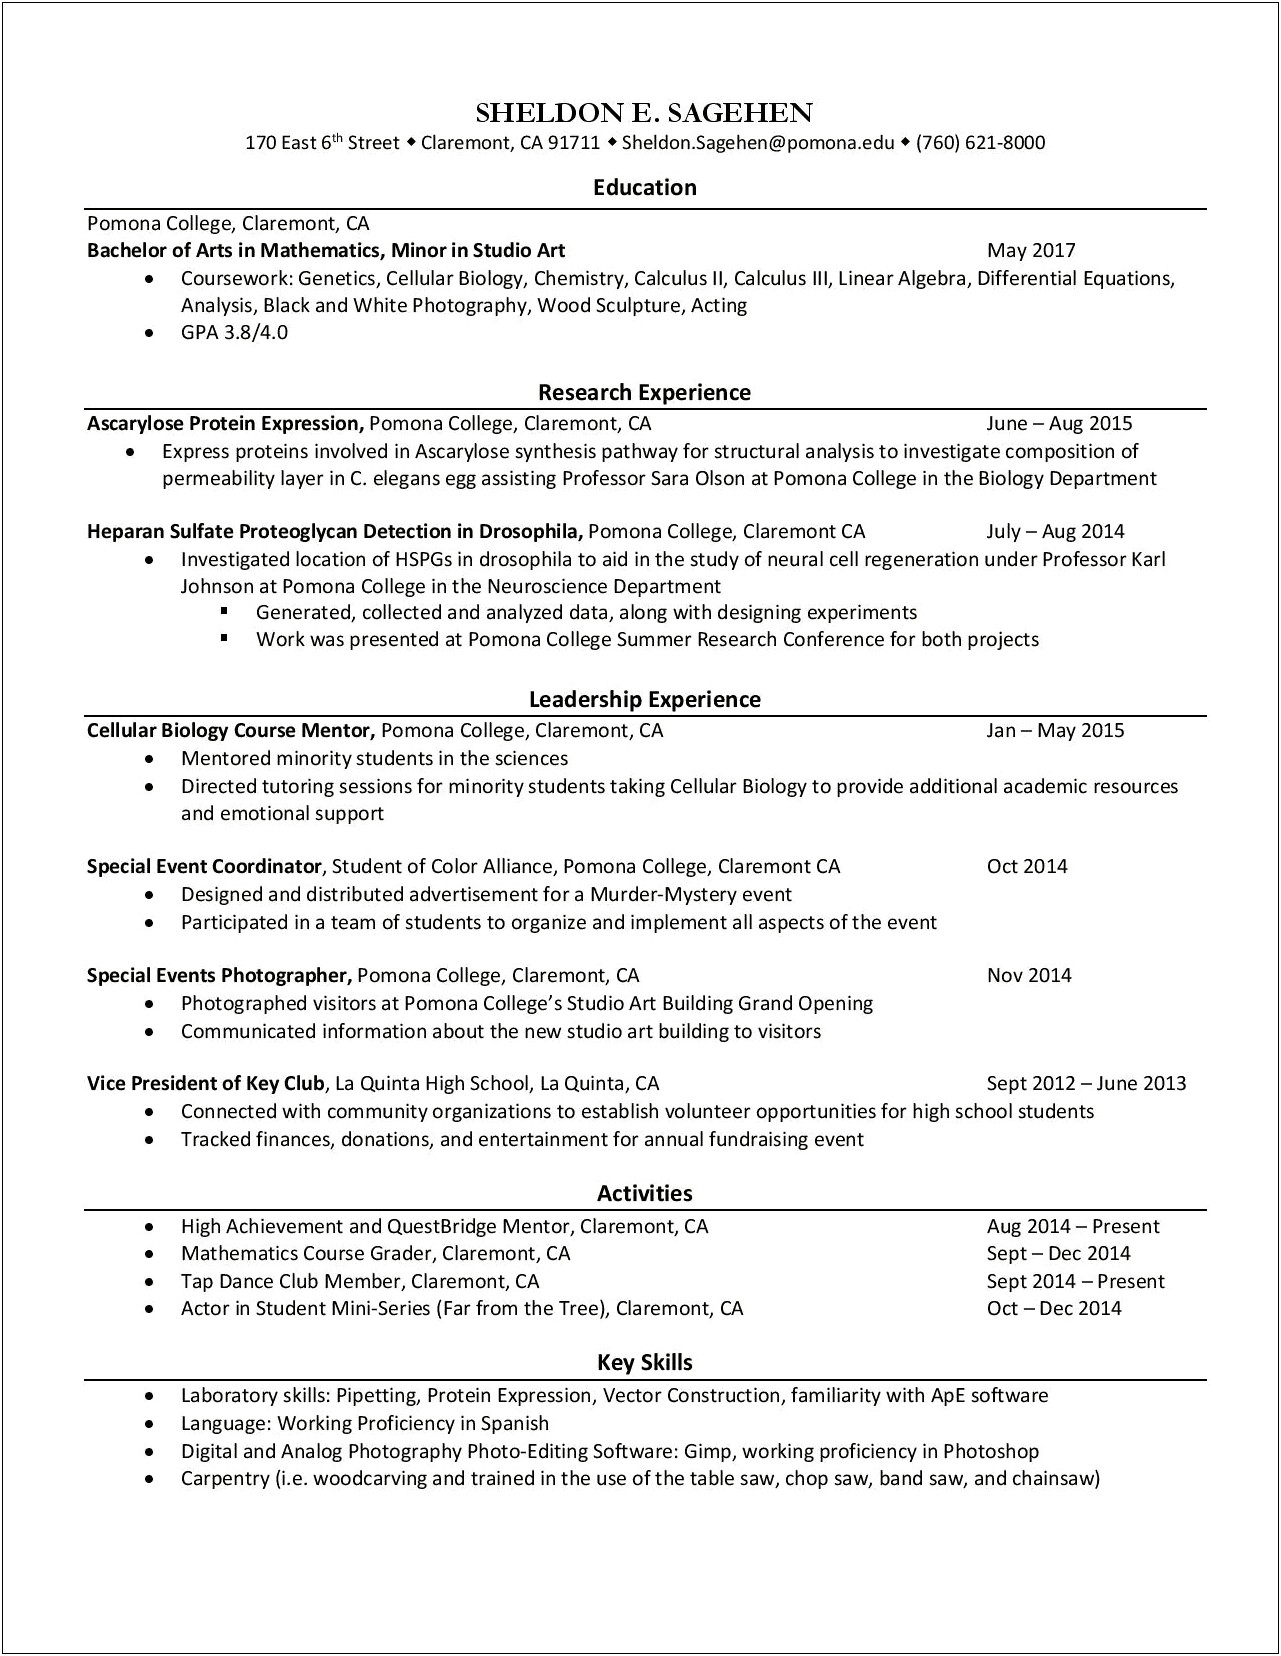 Resume Summary For A Biology Major